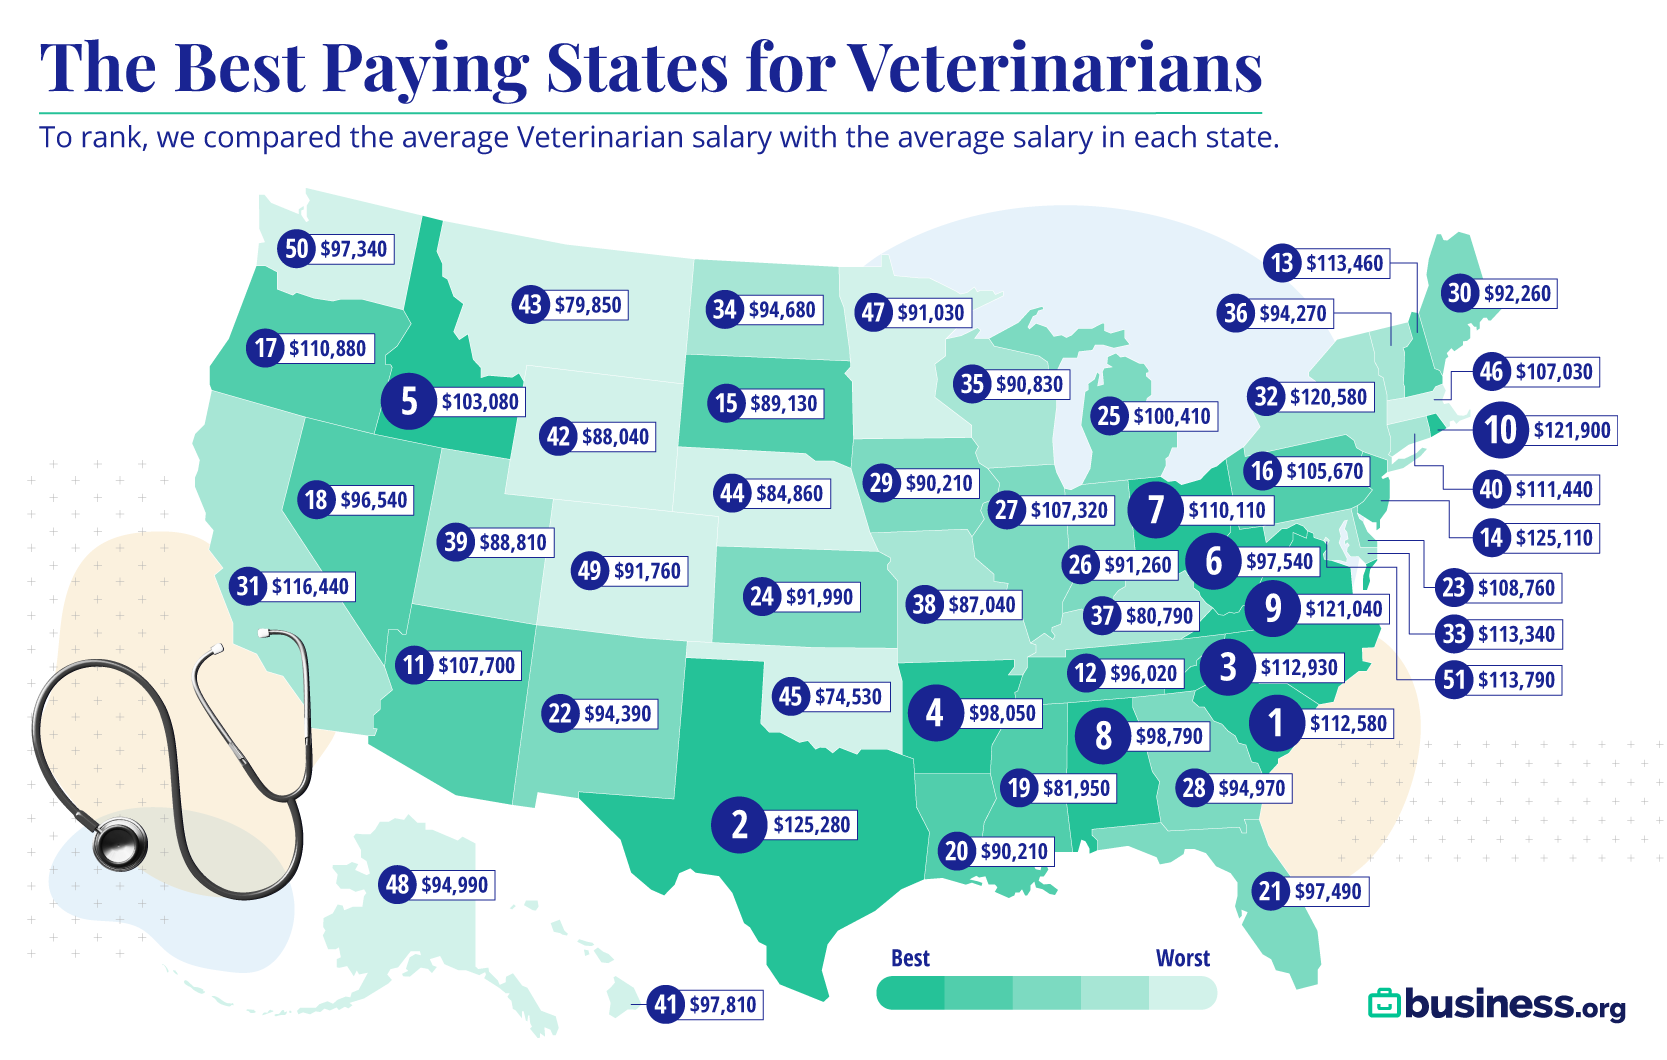 The Bestpaying States for Veterinarians in 2021